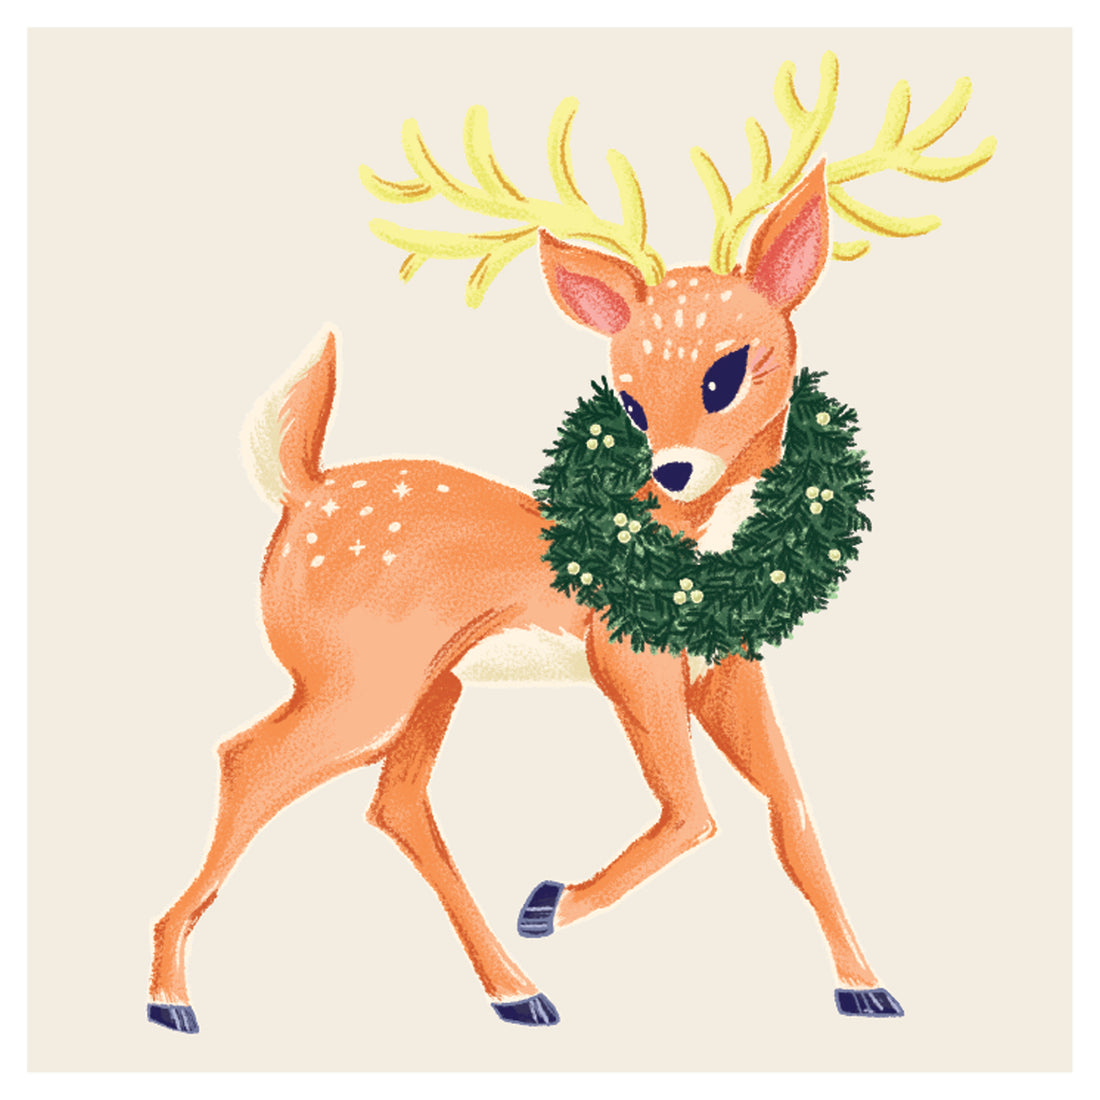 A square cocktail napkin featuring a cute, vintage illustration of a reindeer prancing with a green wreath around his neck, on a cream background.